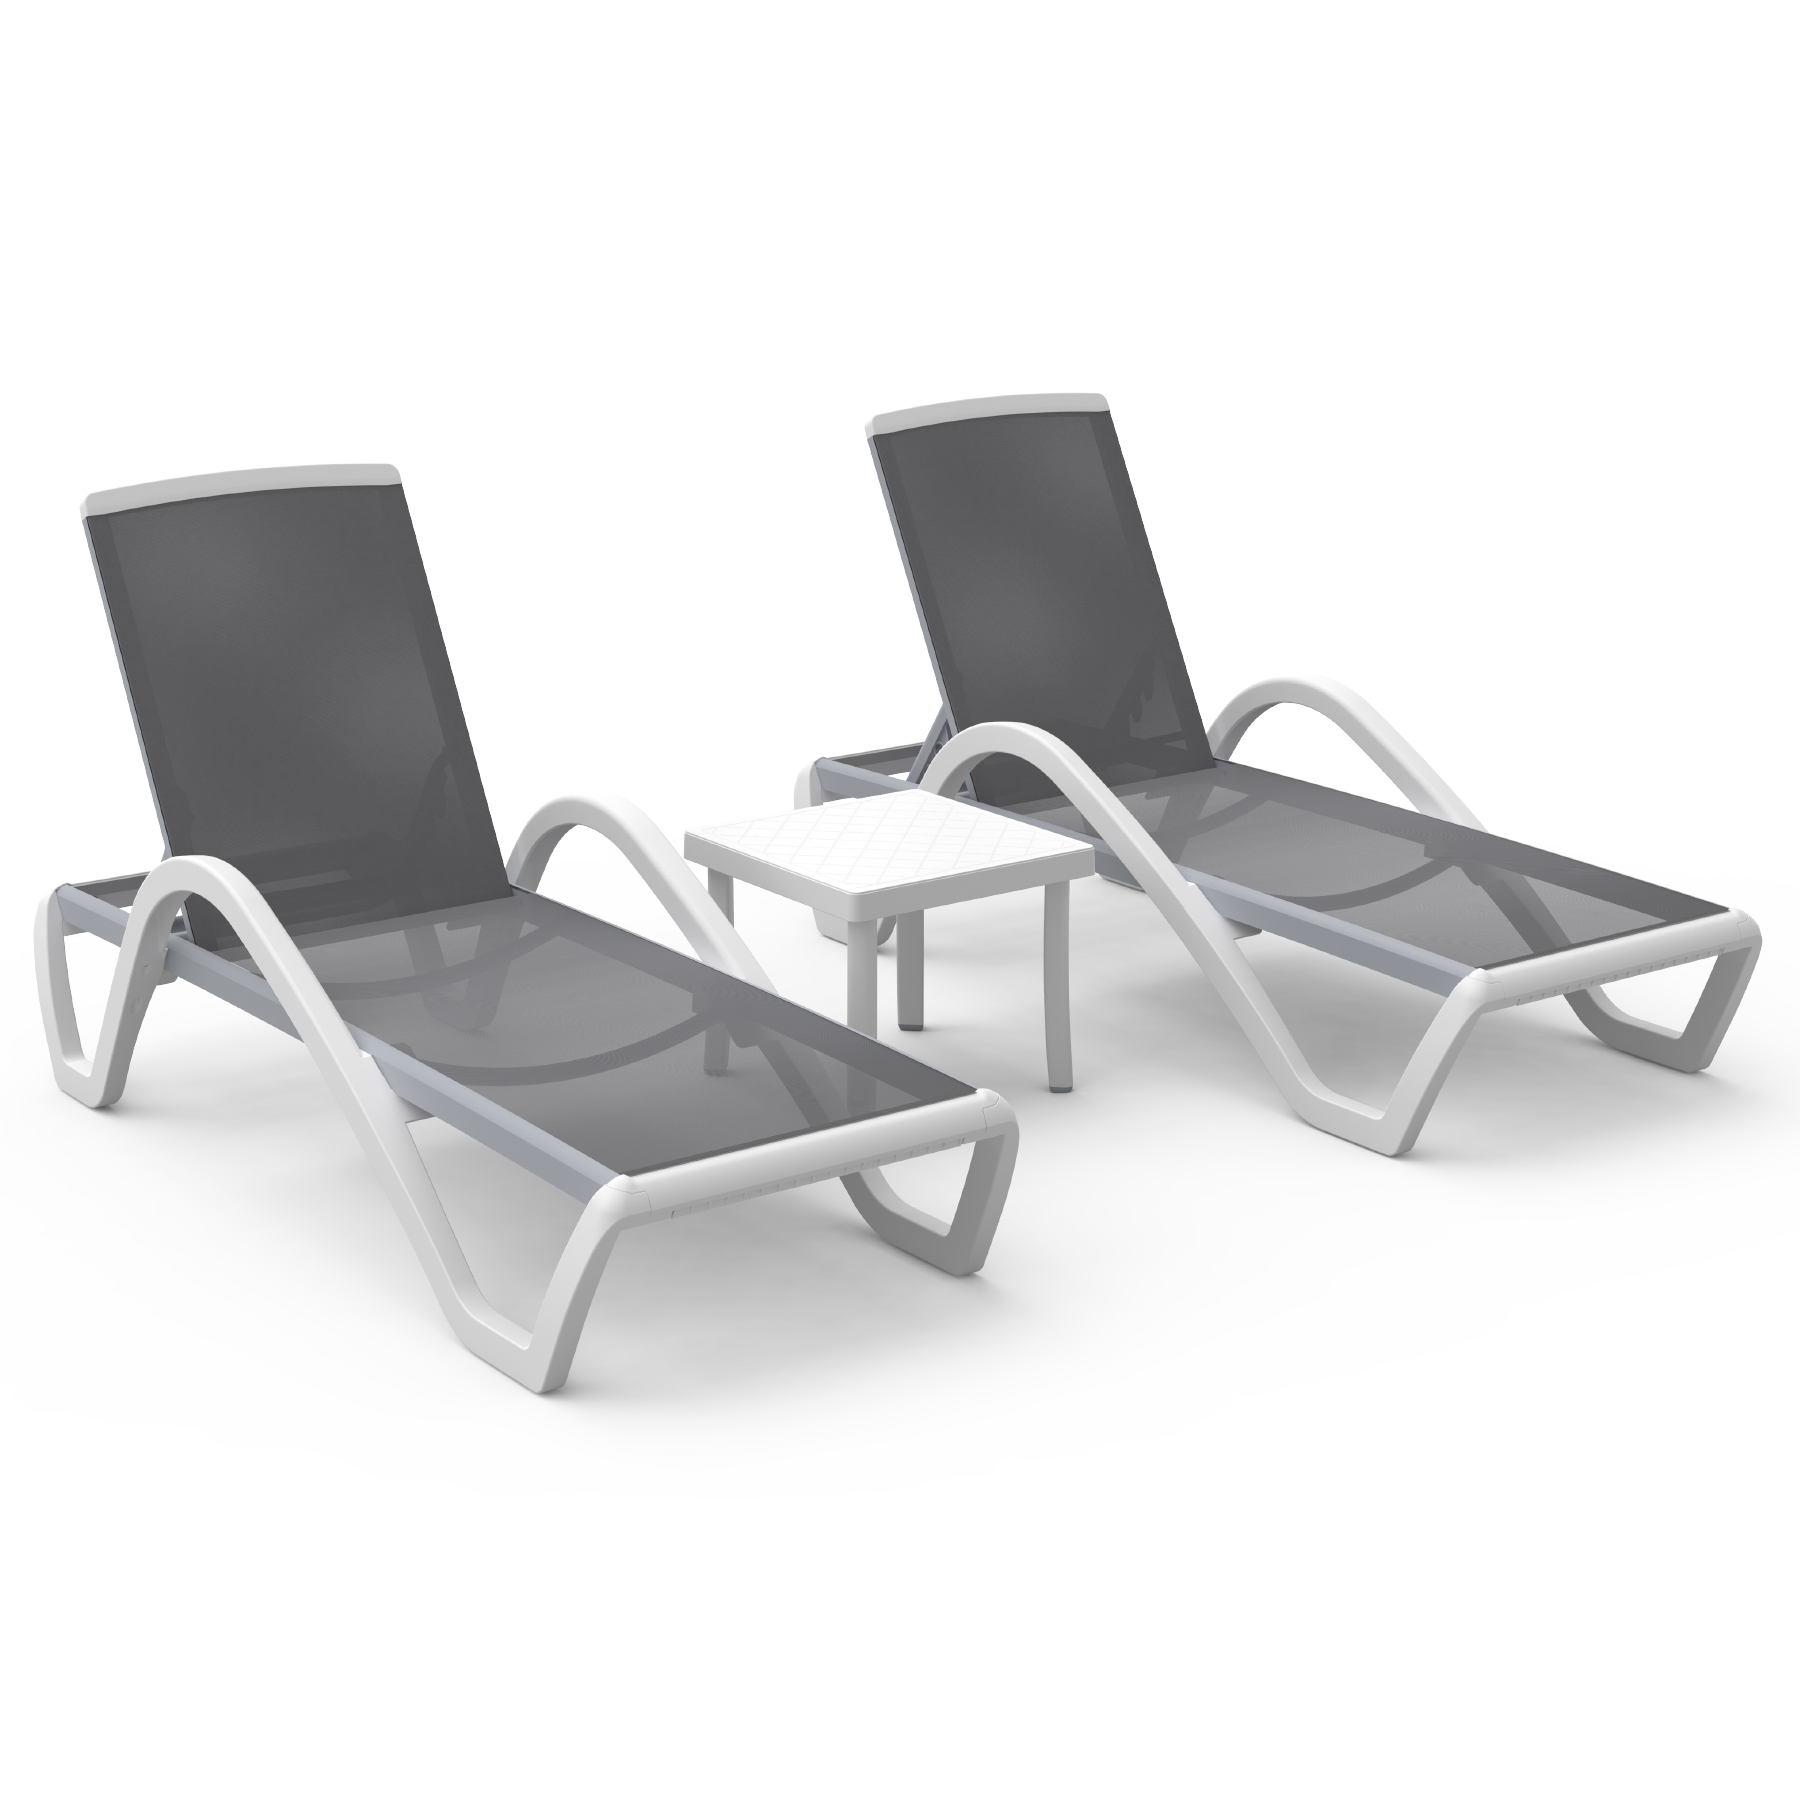 Domi Patio Chaise Lounge Chair Set of 3,Outdoor Aluminum Polypropylene Sunbathing Chair with Adjustable Backrest,Arm,Side Table,for Beach,Yard,Balcony,Poolside(2 Gray Chairs W/Table) - image 3 of 8